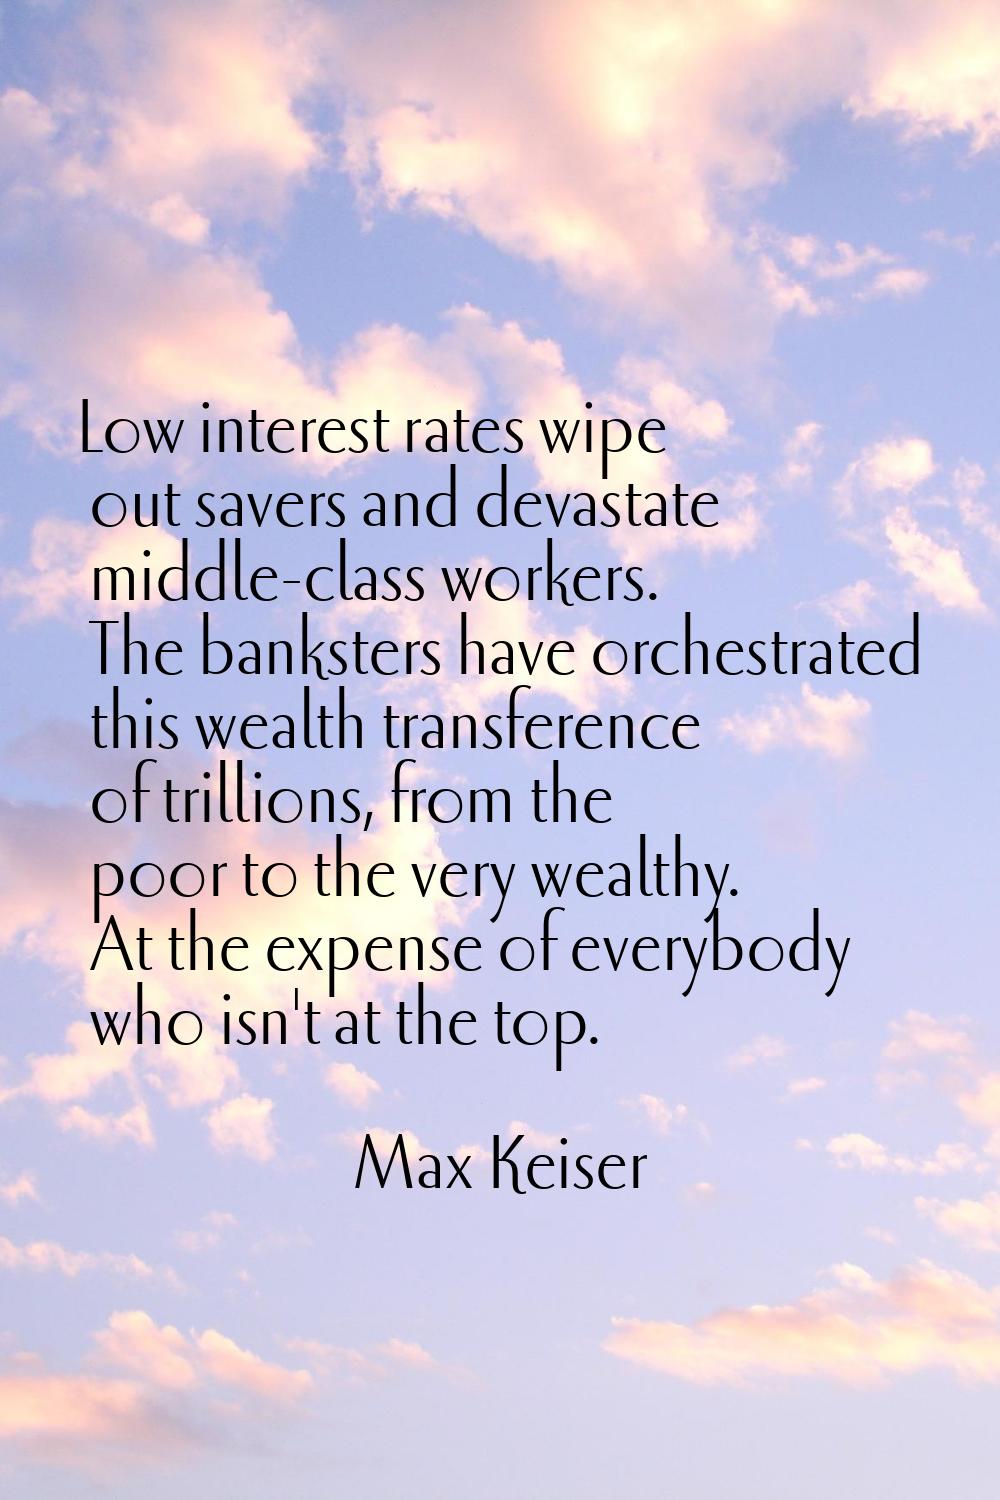 Low interest rates wipe out savers and devastate middle-class workers. The banksters have orchestra